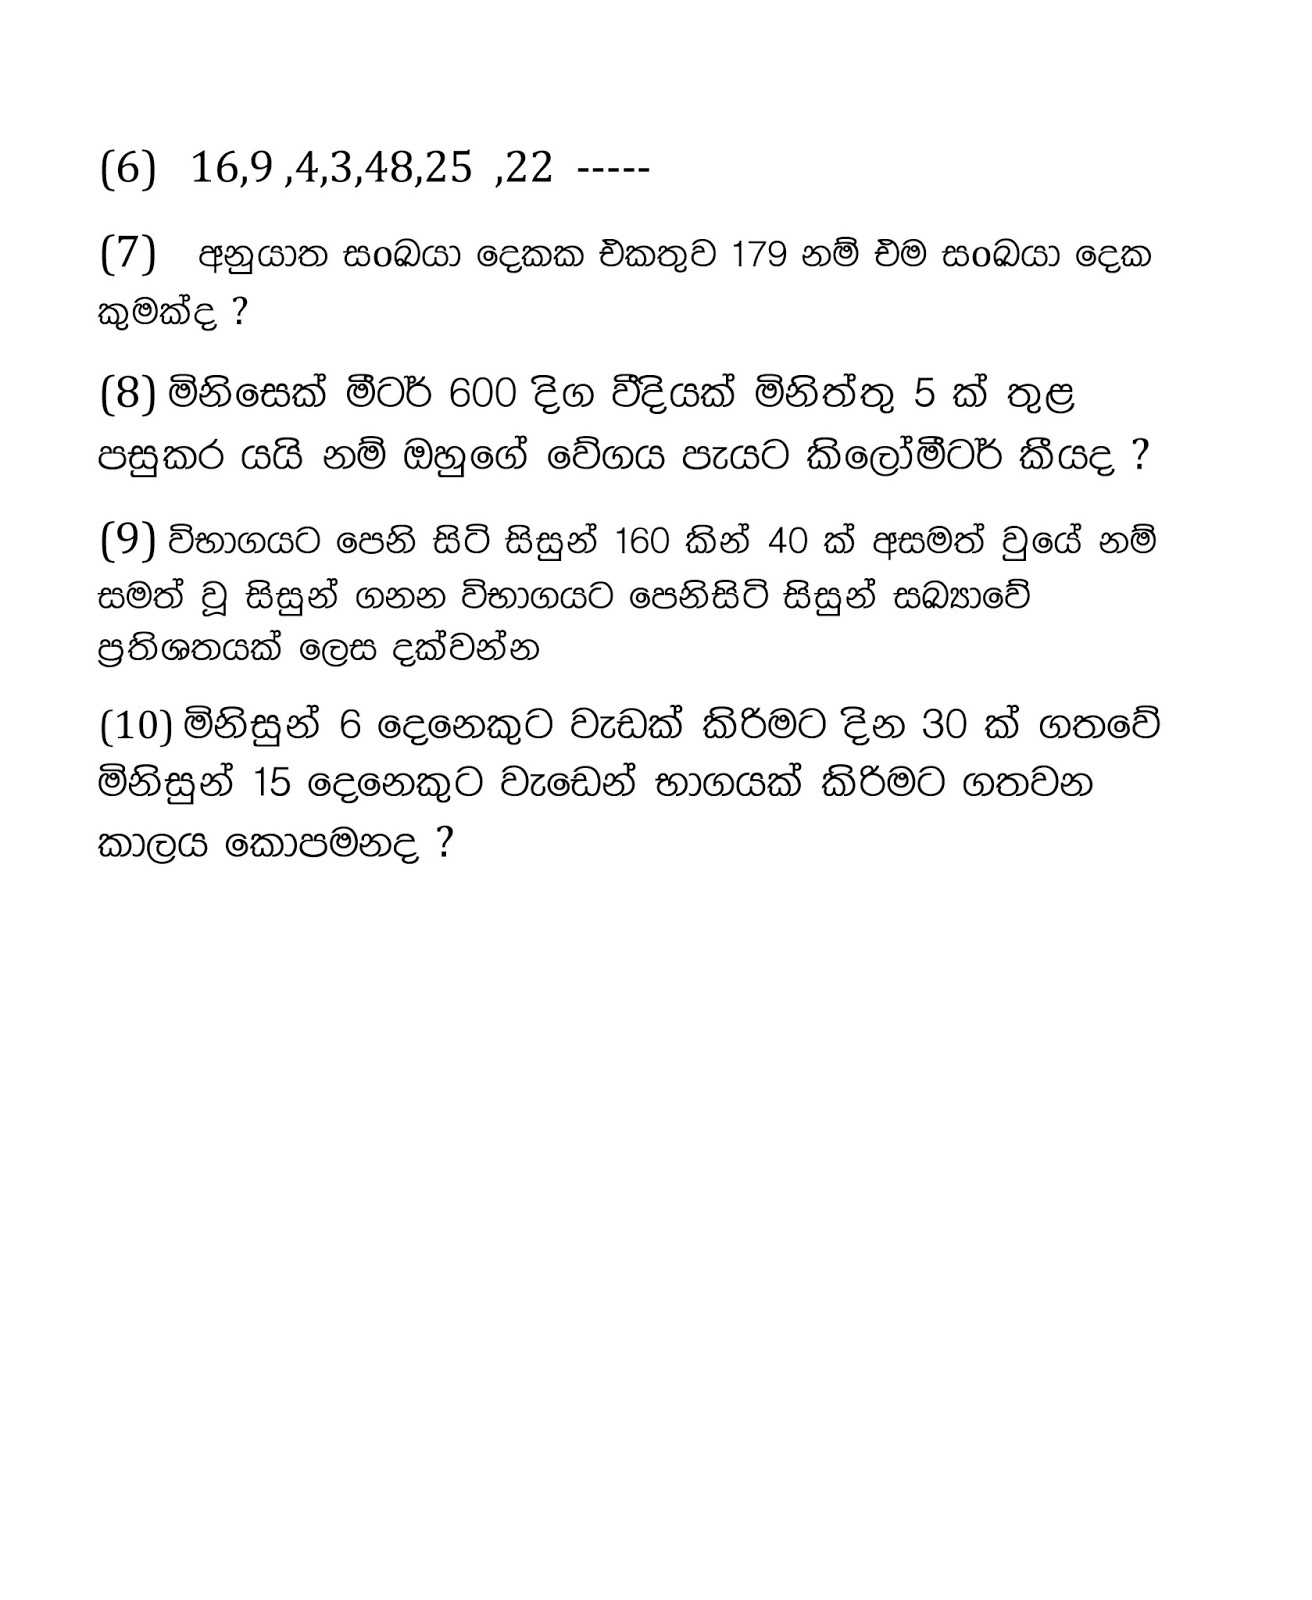 Iq papers in sinhala pdf